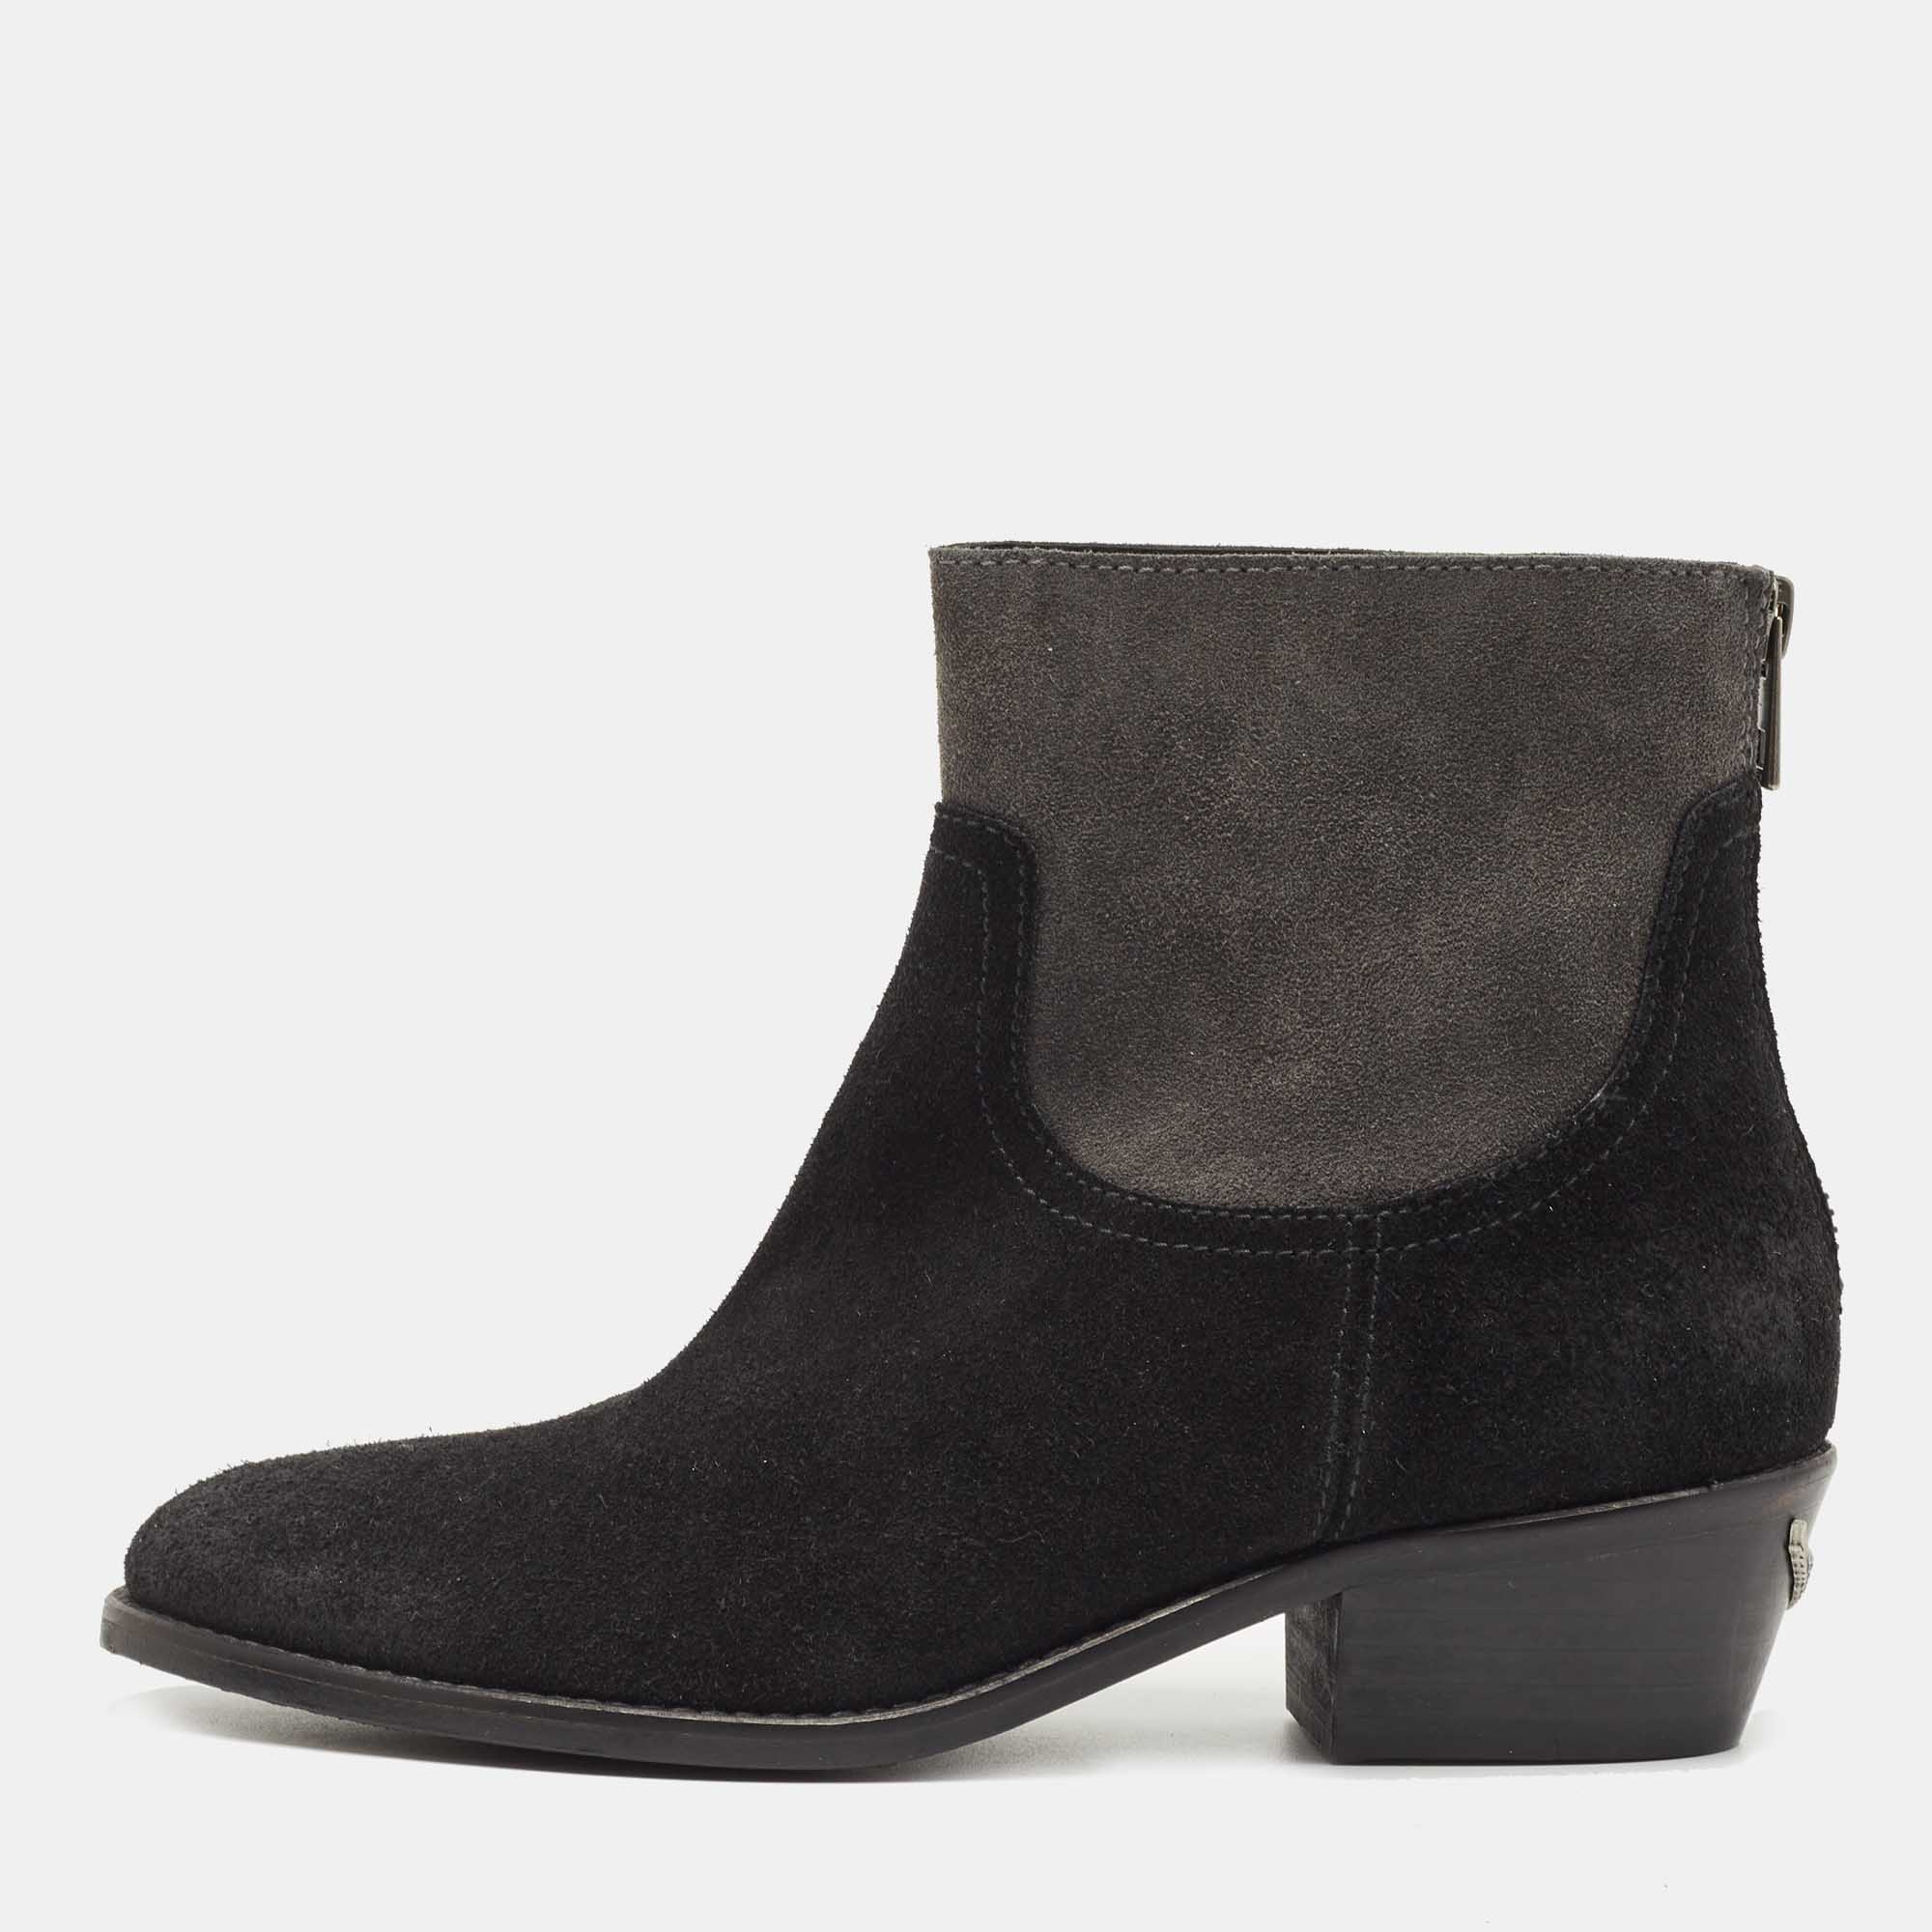 Zadig & voltaire black suede teddy ankle boots size 36